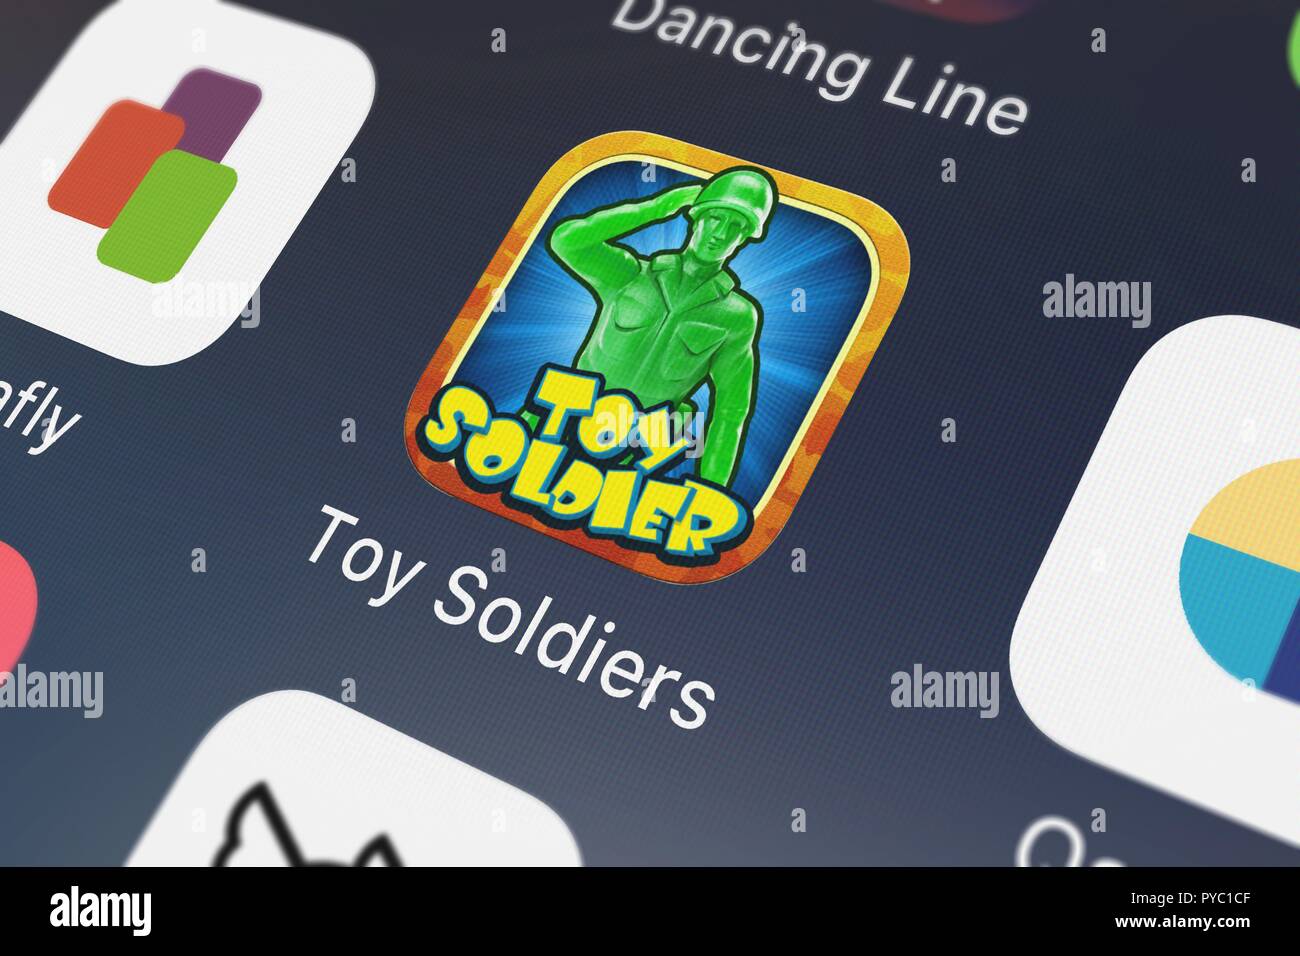 London, United Kingdom - October 26, 2018: Close-up of the Toy Soldiers - A Kids Play Soldier Story icon from Psycho Bear Studios on an iPhone. Stock Photo